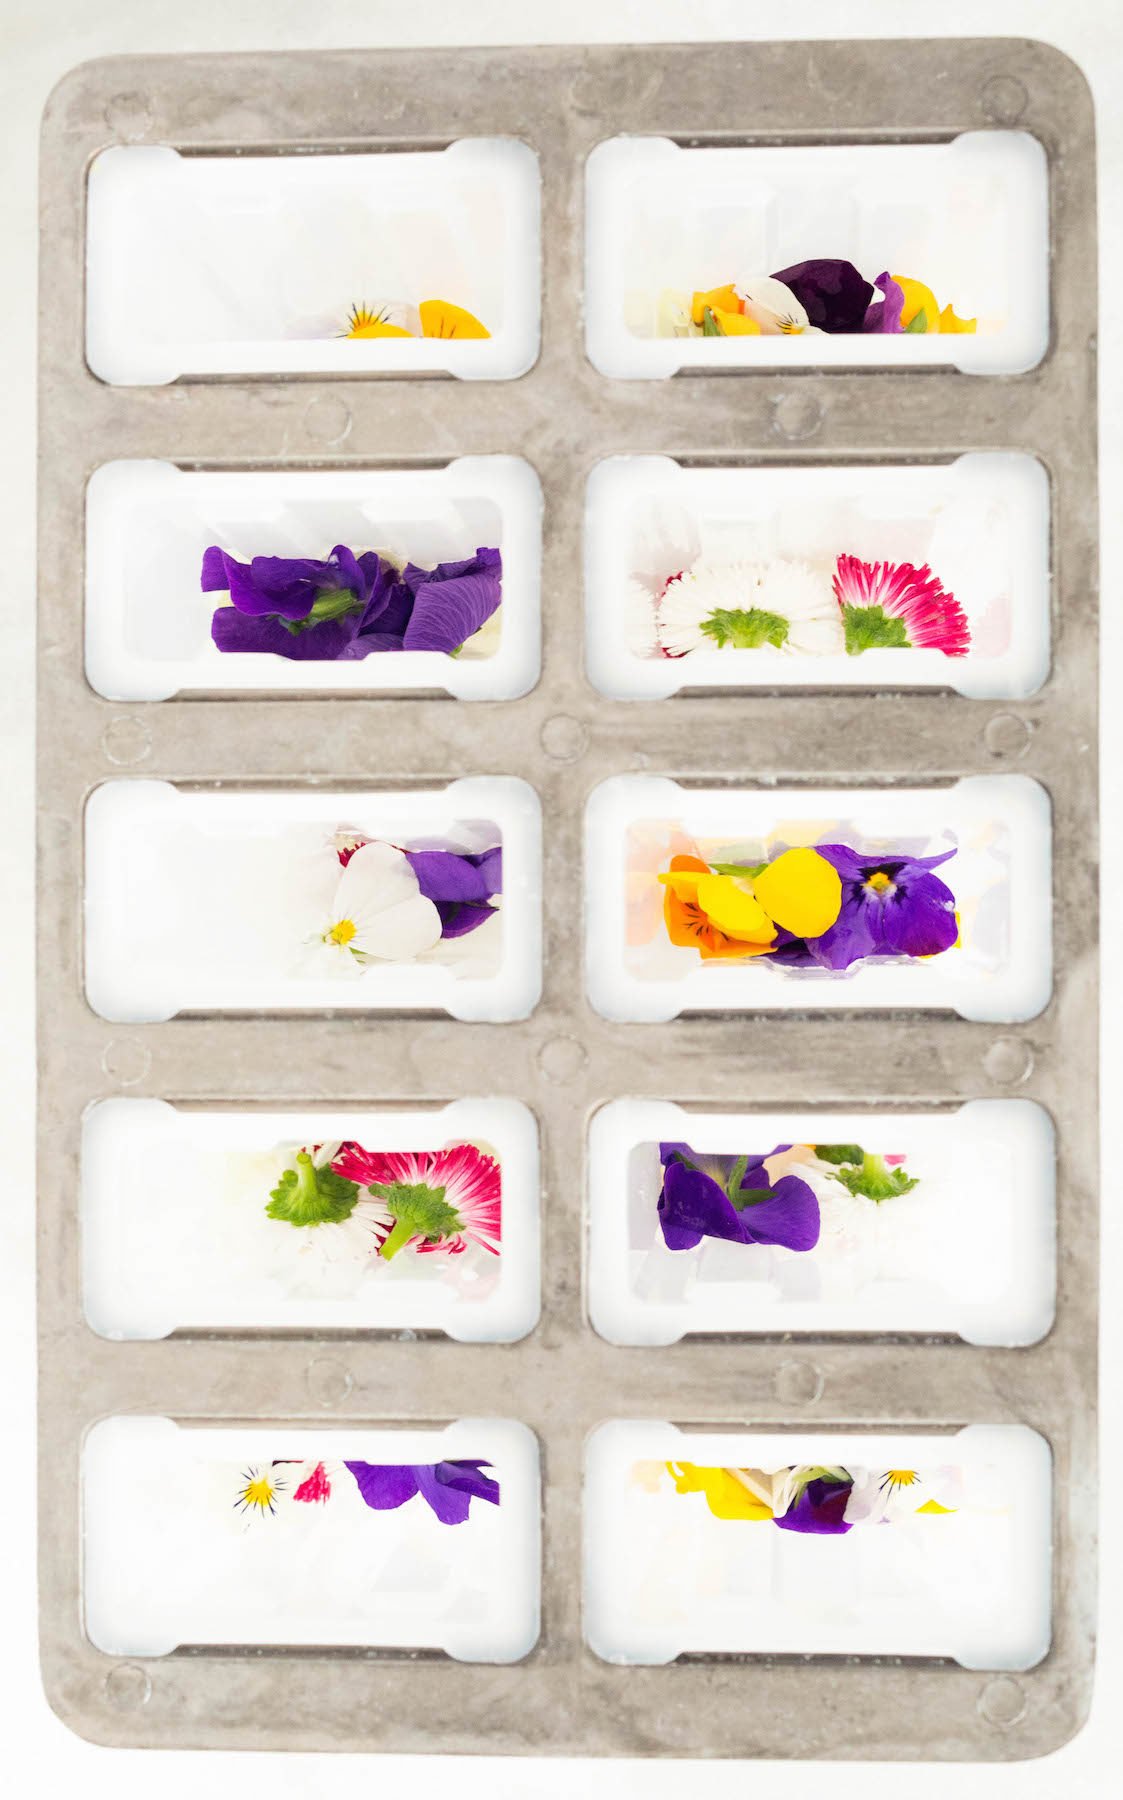 Overhead view of a clear popsicle mold filled with edible flowers at the bottom.